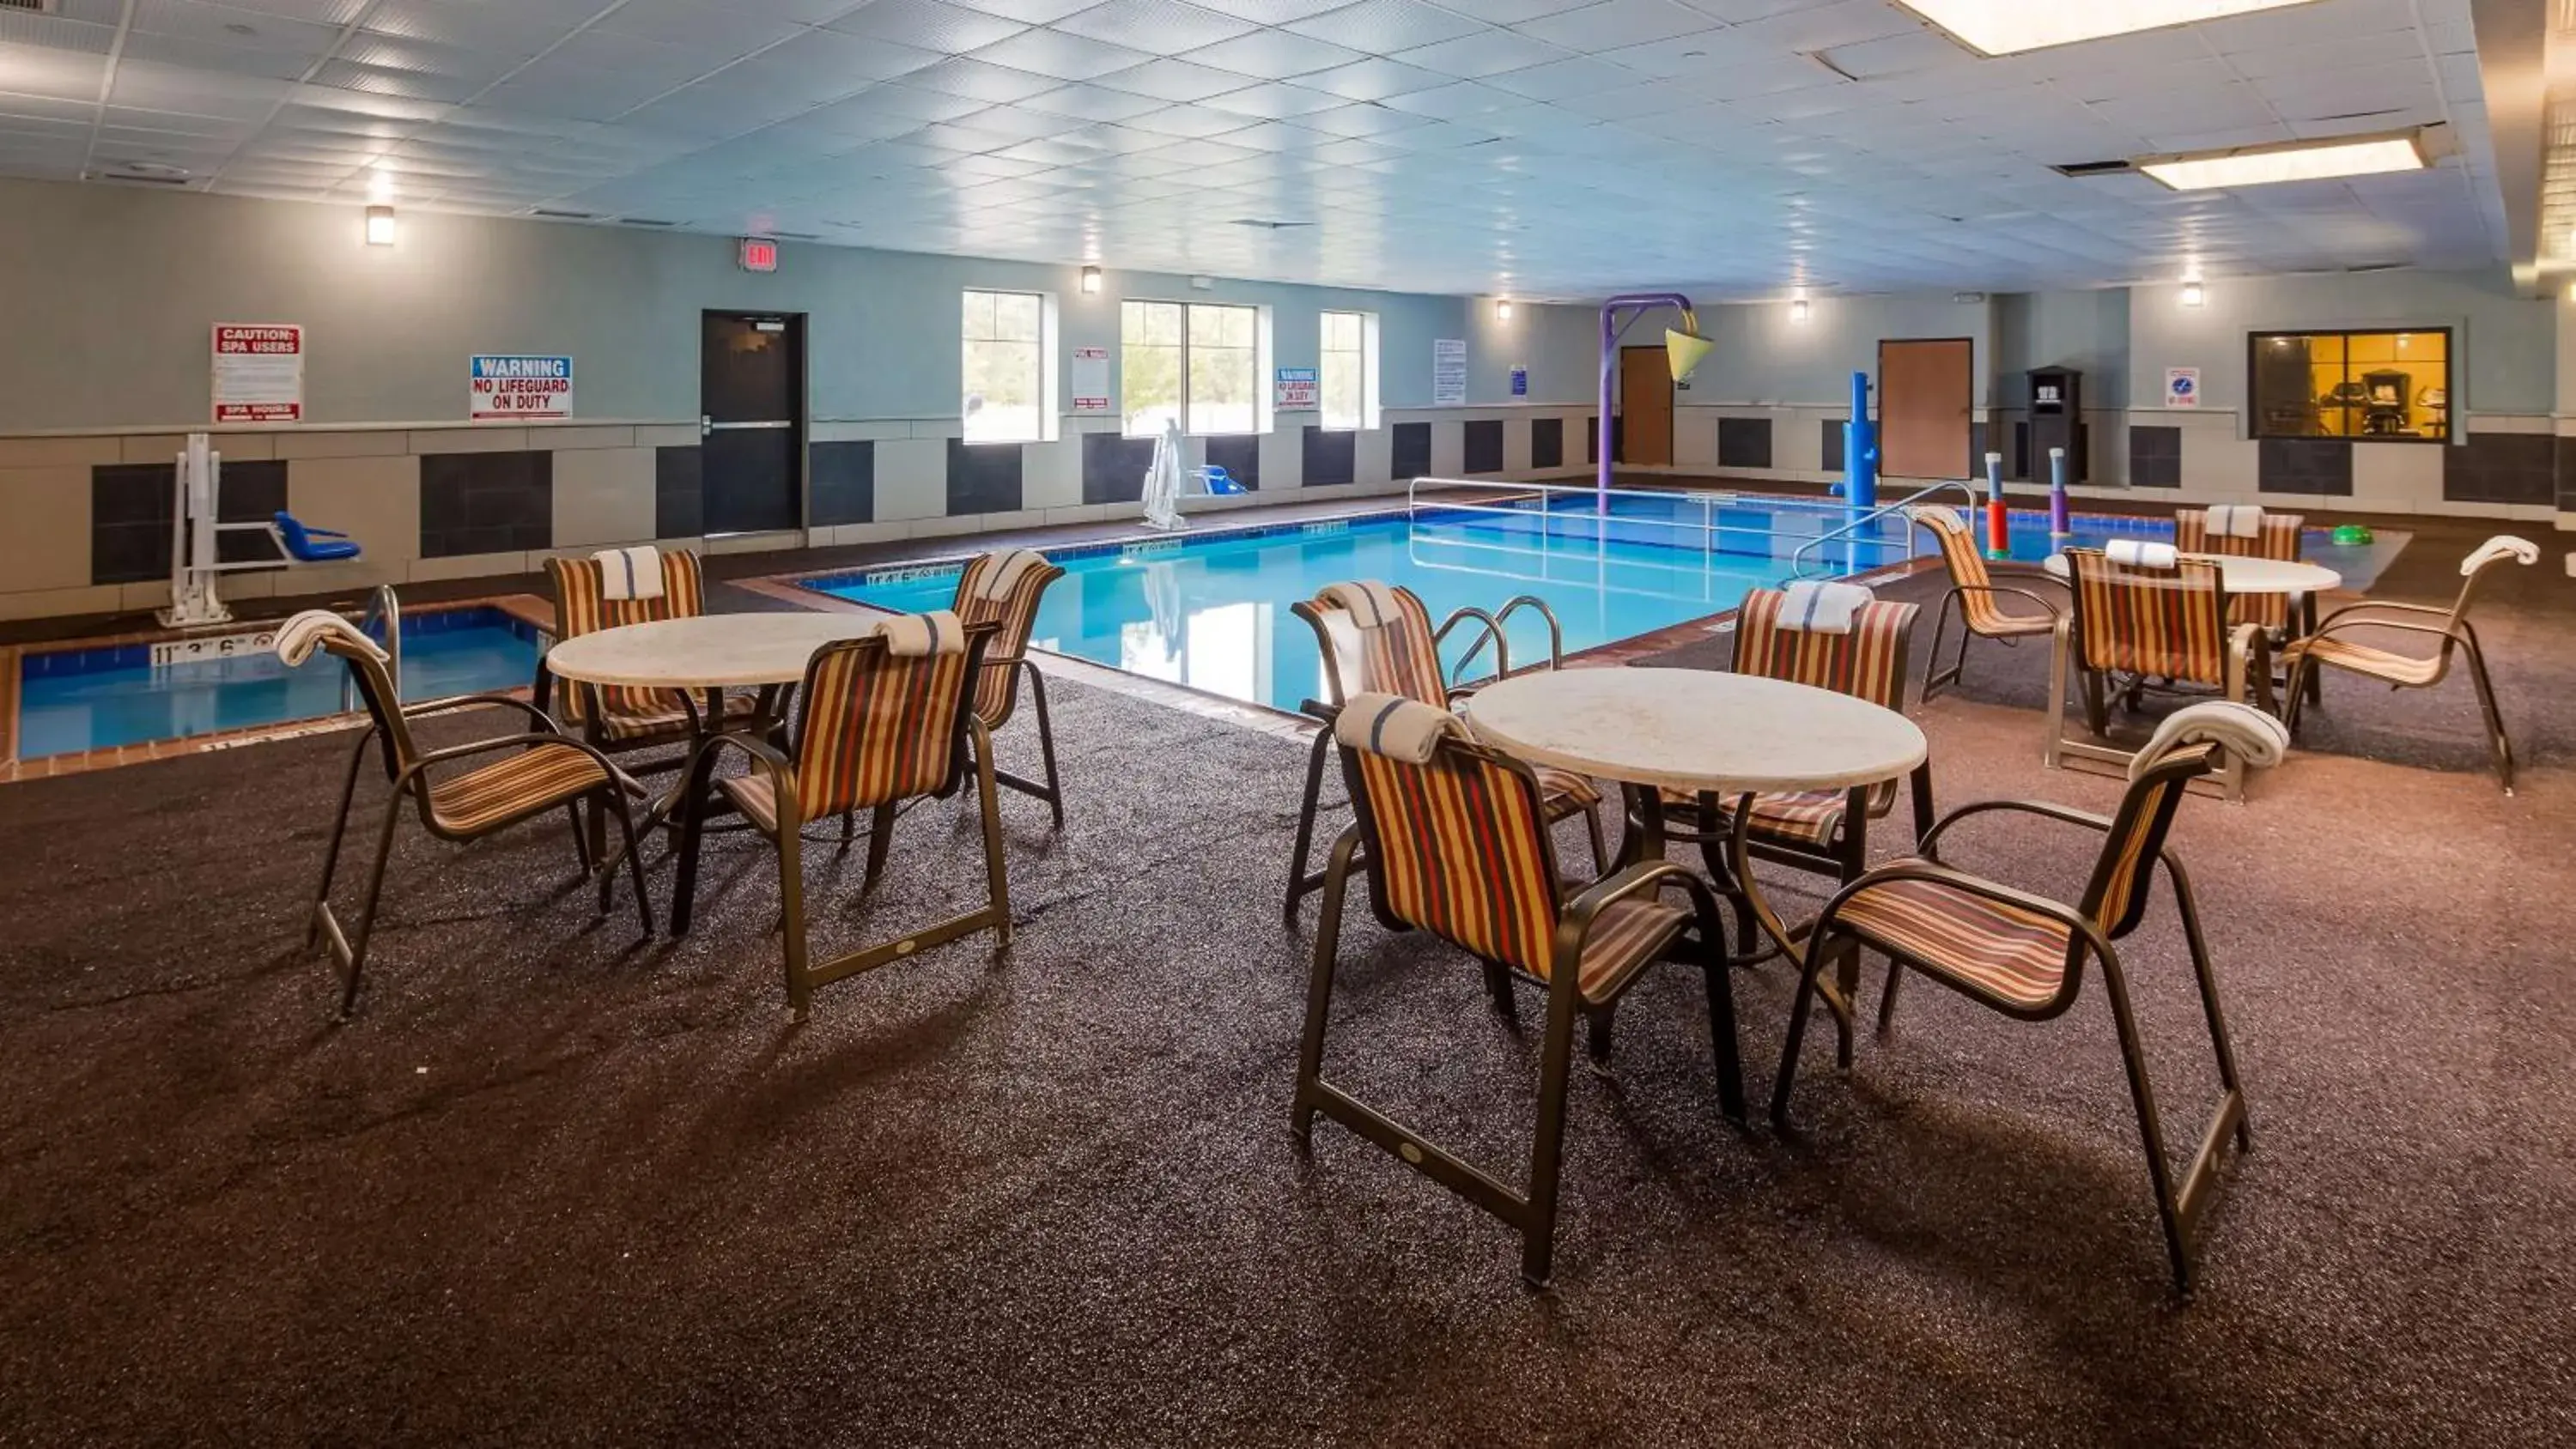 On site, Swimming Pool in Best Western Plus Portage Hotel and Suites